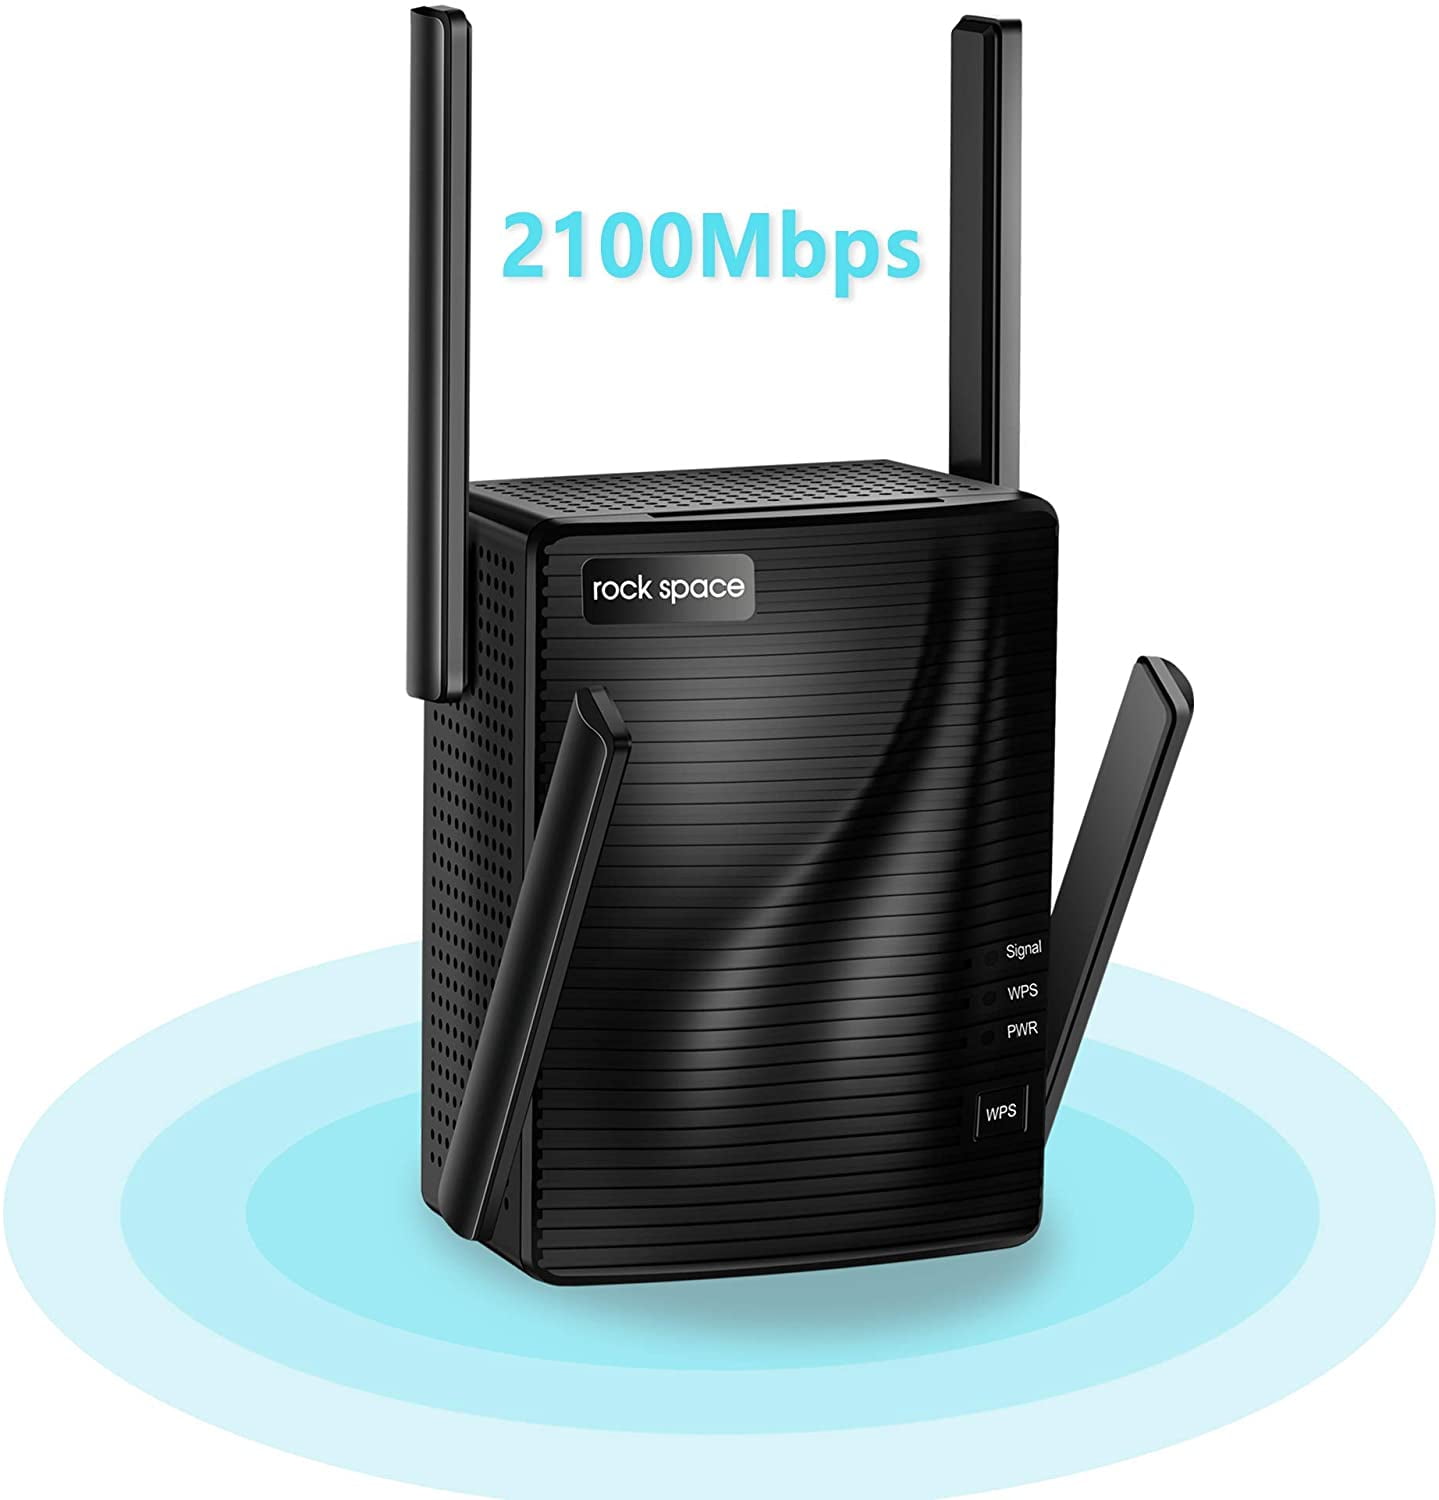 2100 Mbps WiFi Range Extender - rockspace WiFi Repeater, AC2100 WiFi Booster, Wireless Signal Booster for Home, Gigabit Port, 360° Full Coverage, Extends WiFi Range -